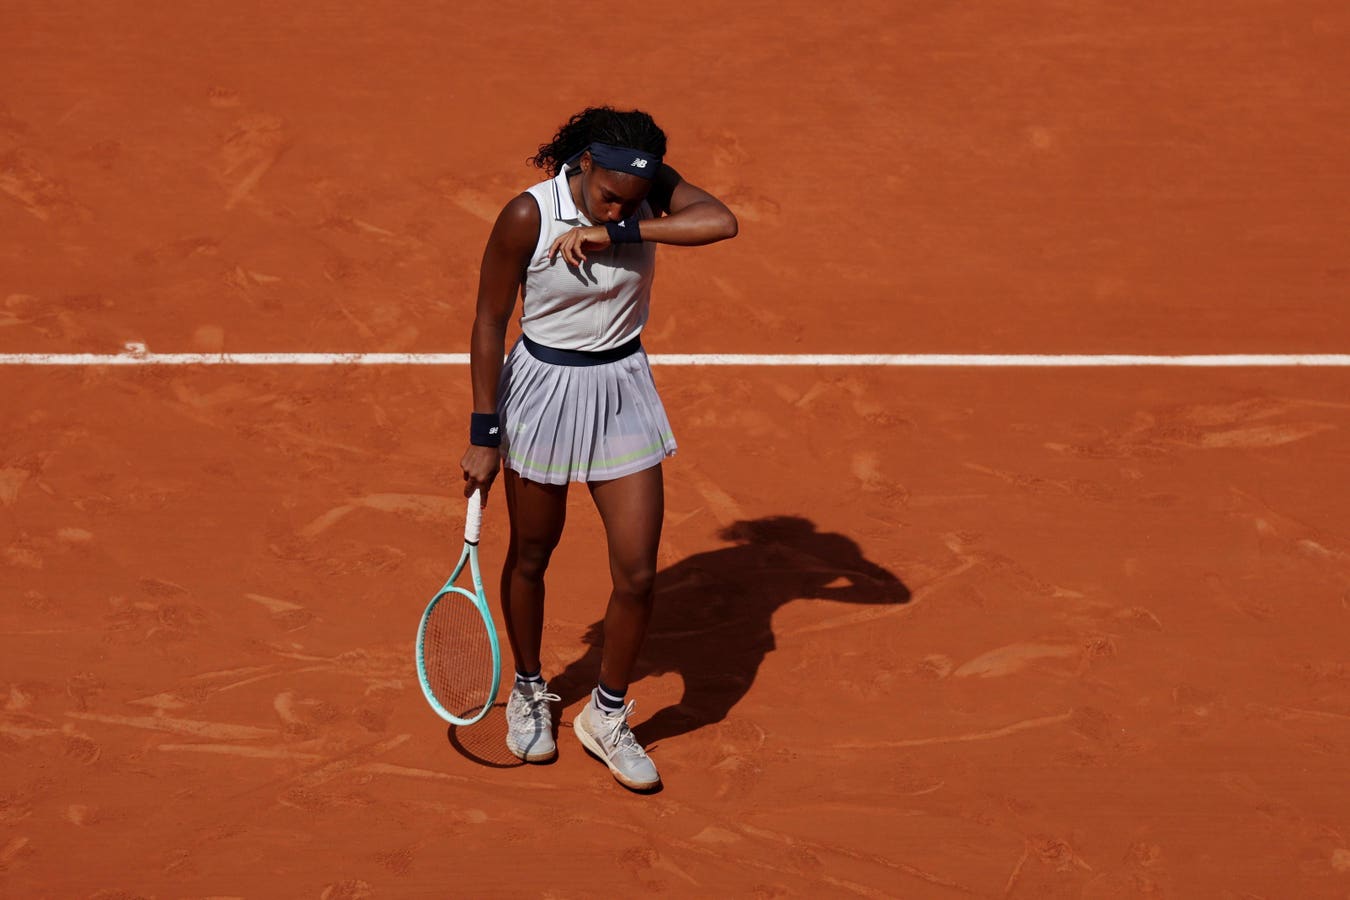 Coco Gauff Moved To Tears In French Open Semifinal Loss To No. 1 Iga Swiatek